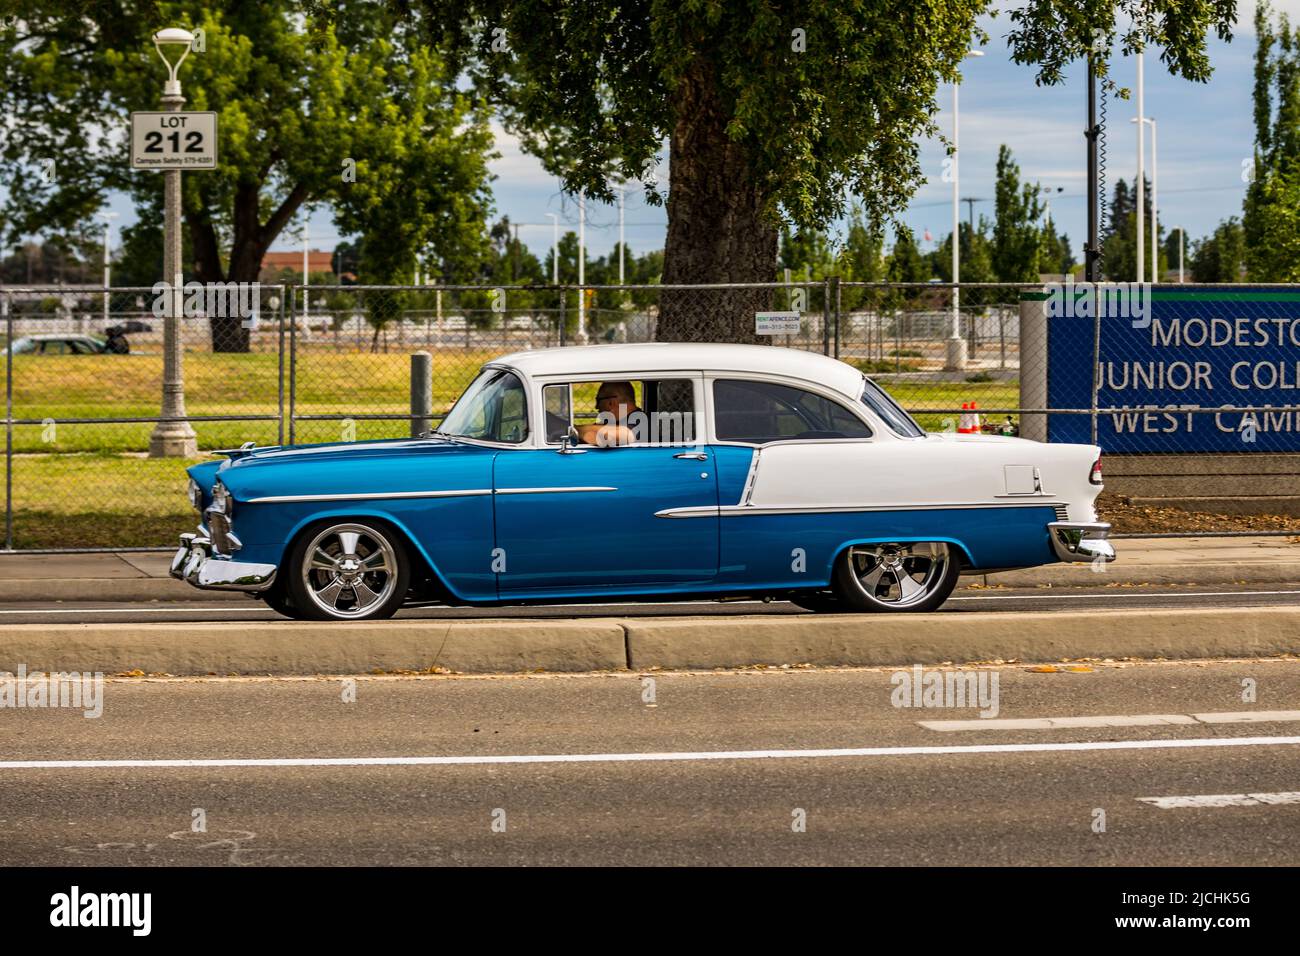 A 1955 Chevrolet Belair 2 door arrives  at the American Graffiti charity Car Show at the Modesto Junior College campus June 11-12 2022 Stock Photo